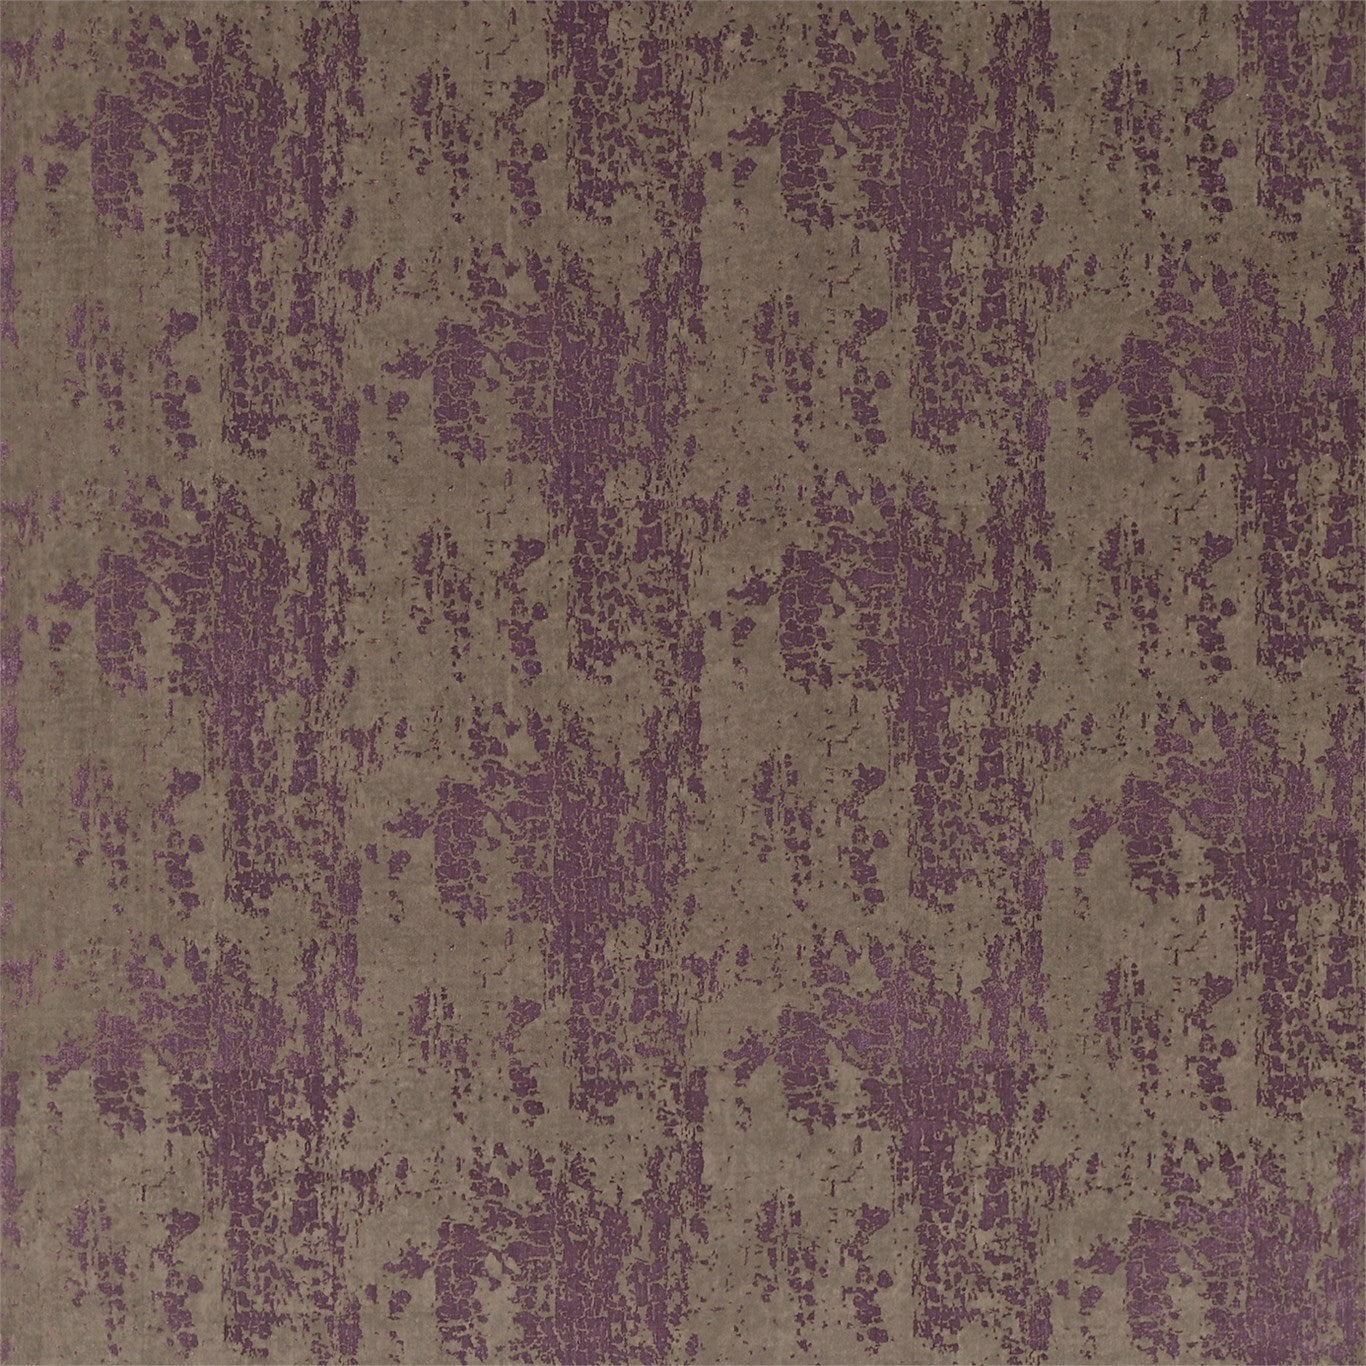 Eglomis������������������ Fabric by Harlequin - HBLV130984 - Amethyst